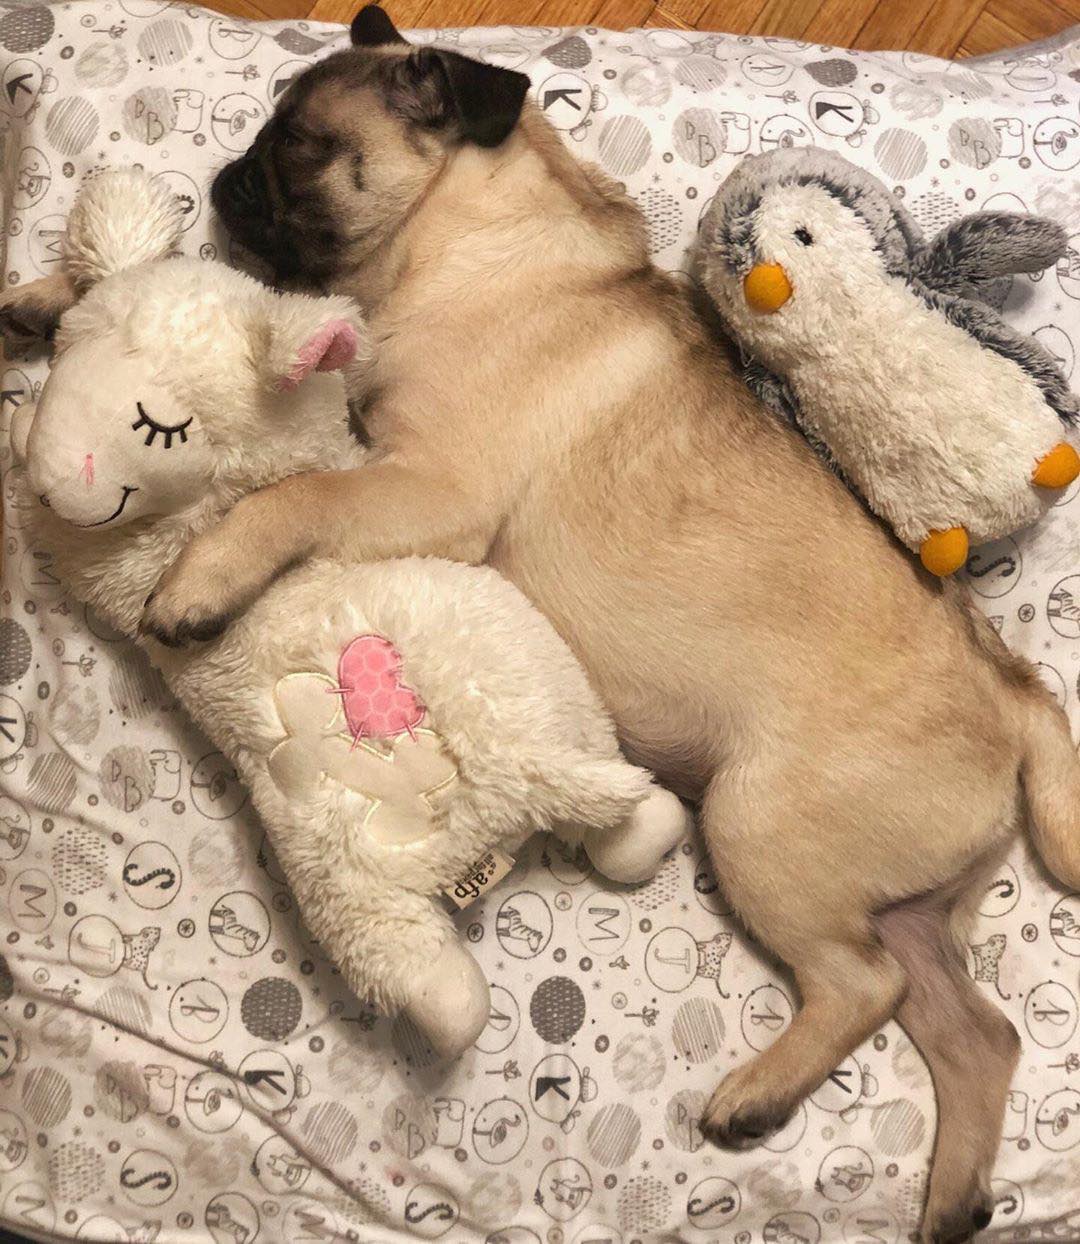 A Pug sleeping on the bed with its penguin and sheep stuffed toy